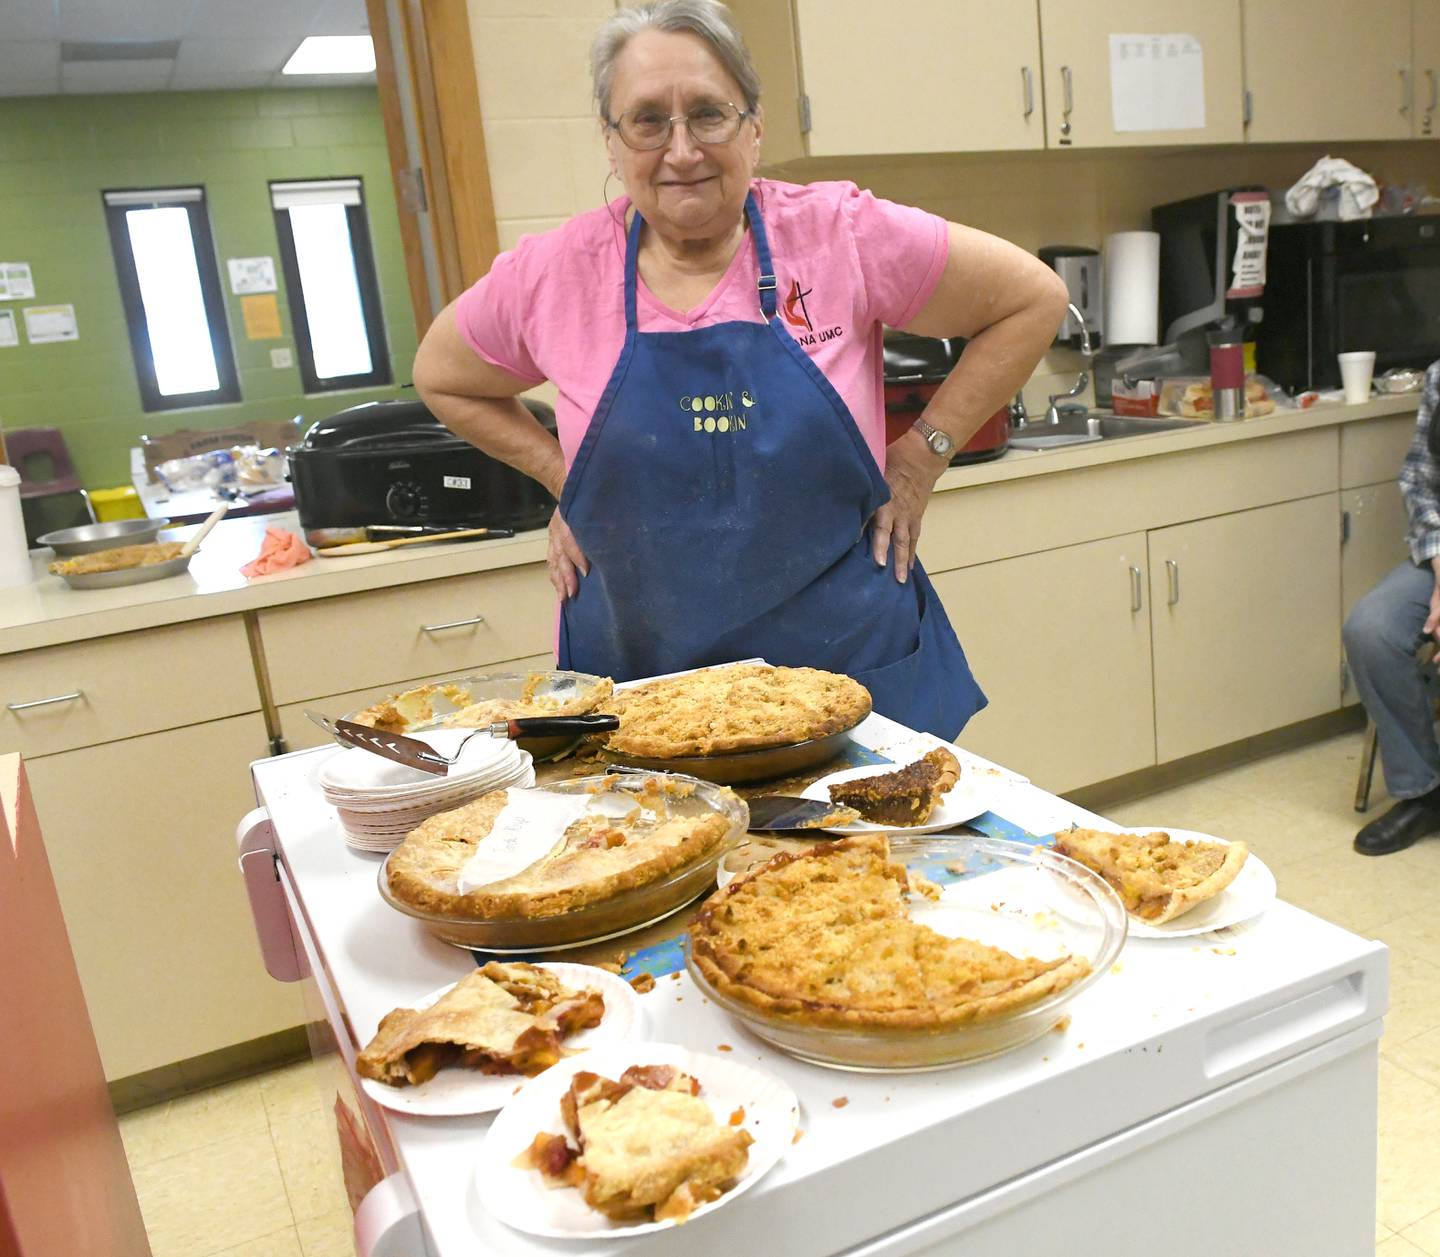 Gail Beck of Chana, one of the pie baking crews for the Chana United Methodist Church, stands over some of the selection offered at the Oregon Woman's Club Antique Show in Oregon. Homemade pies were just one of the items sold by church volunteers at the show's concession stand.